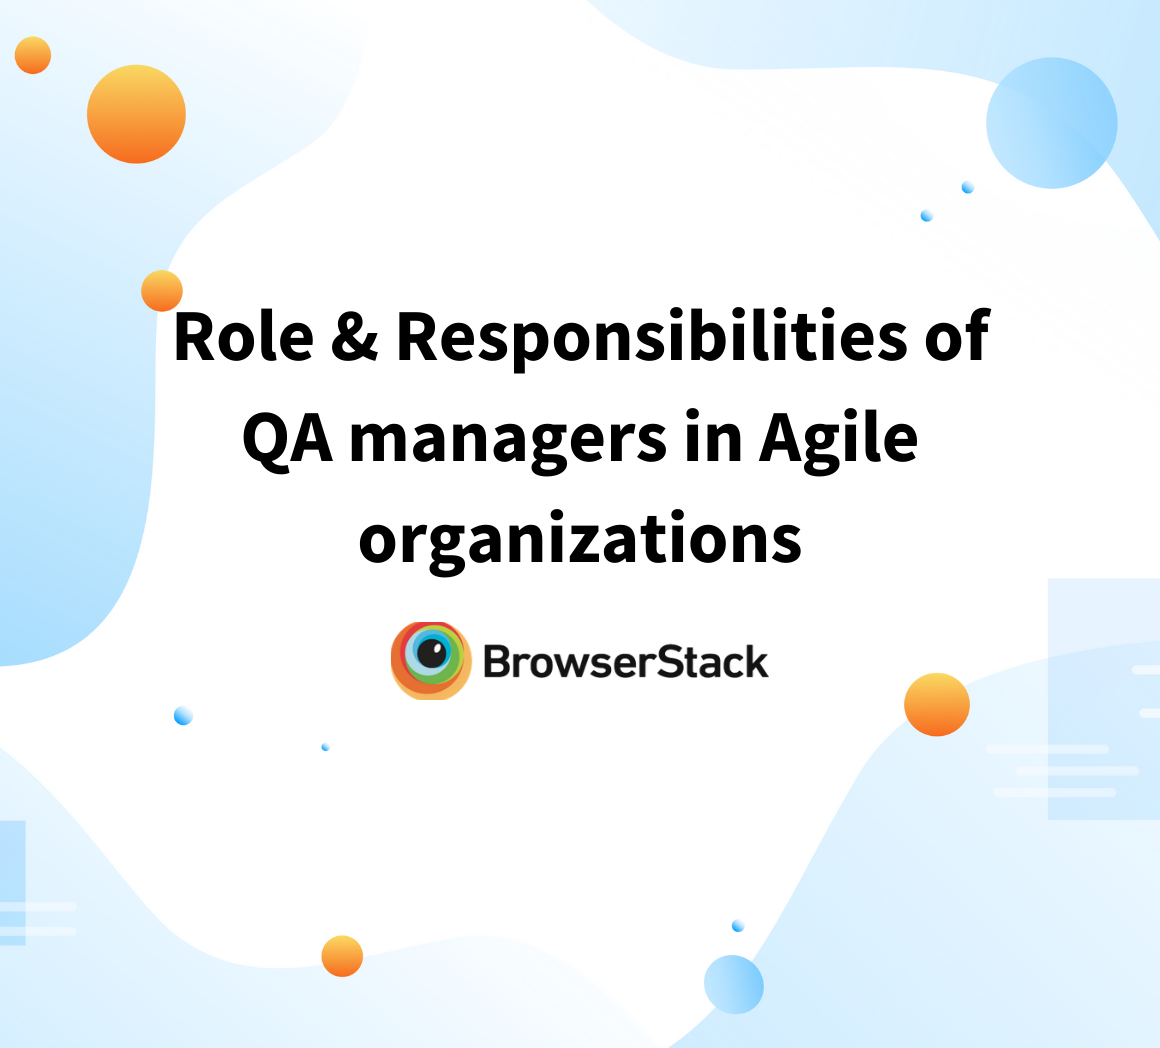 Role of QA managers in Agile